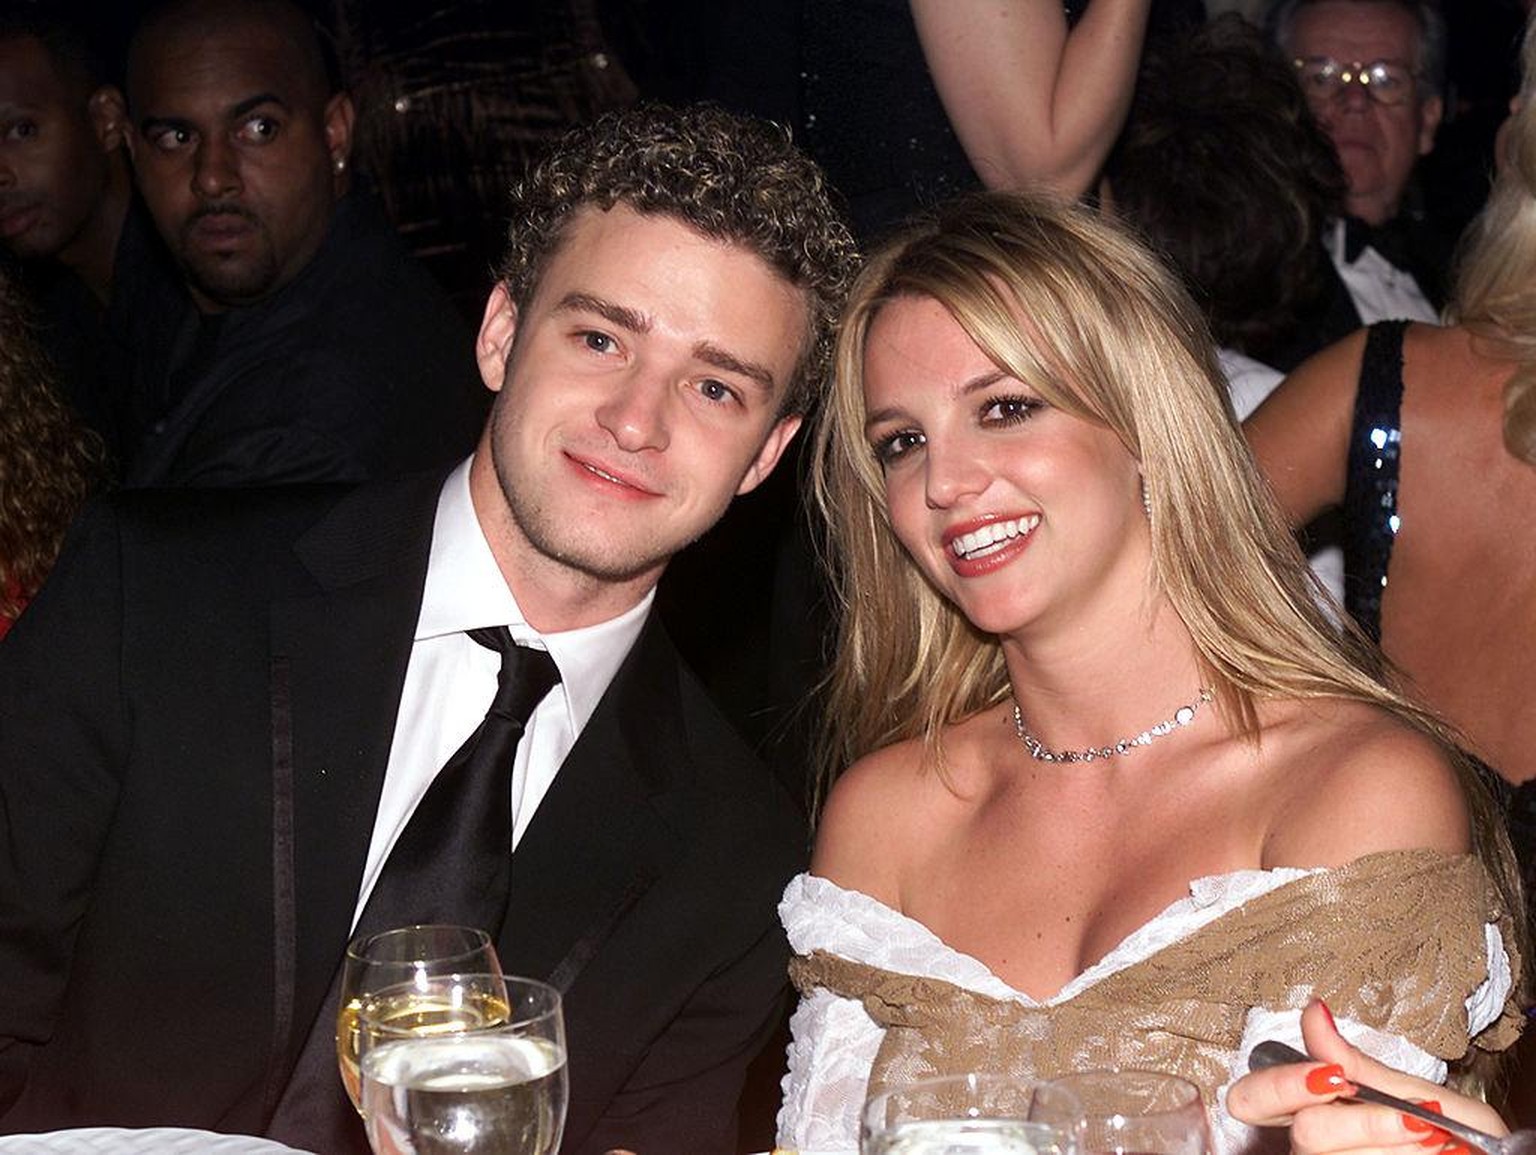 Justin Timberlake and Britney Spears at the 27th Annual Clive Davis Pre-Grammy party at the Beverly Hills Hotel in Los Angeles, Ca., 2/26/02. Photo by Frank Micelotta/ImageDirect.